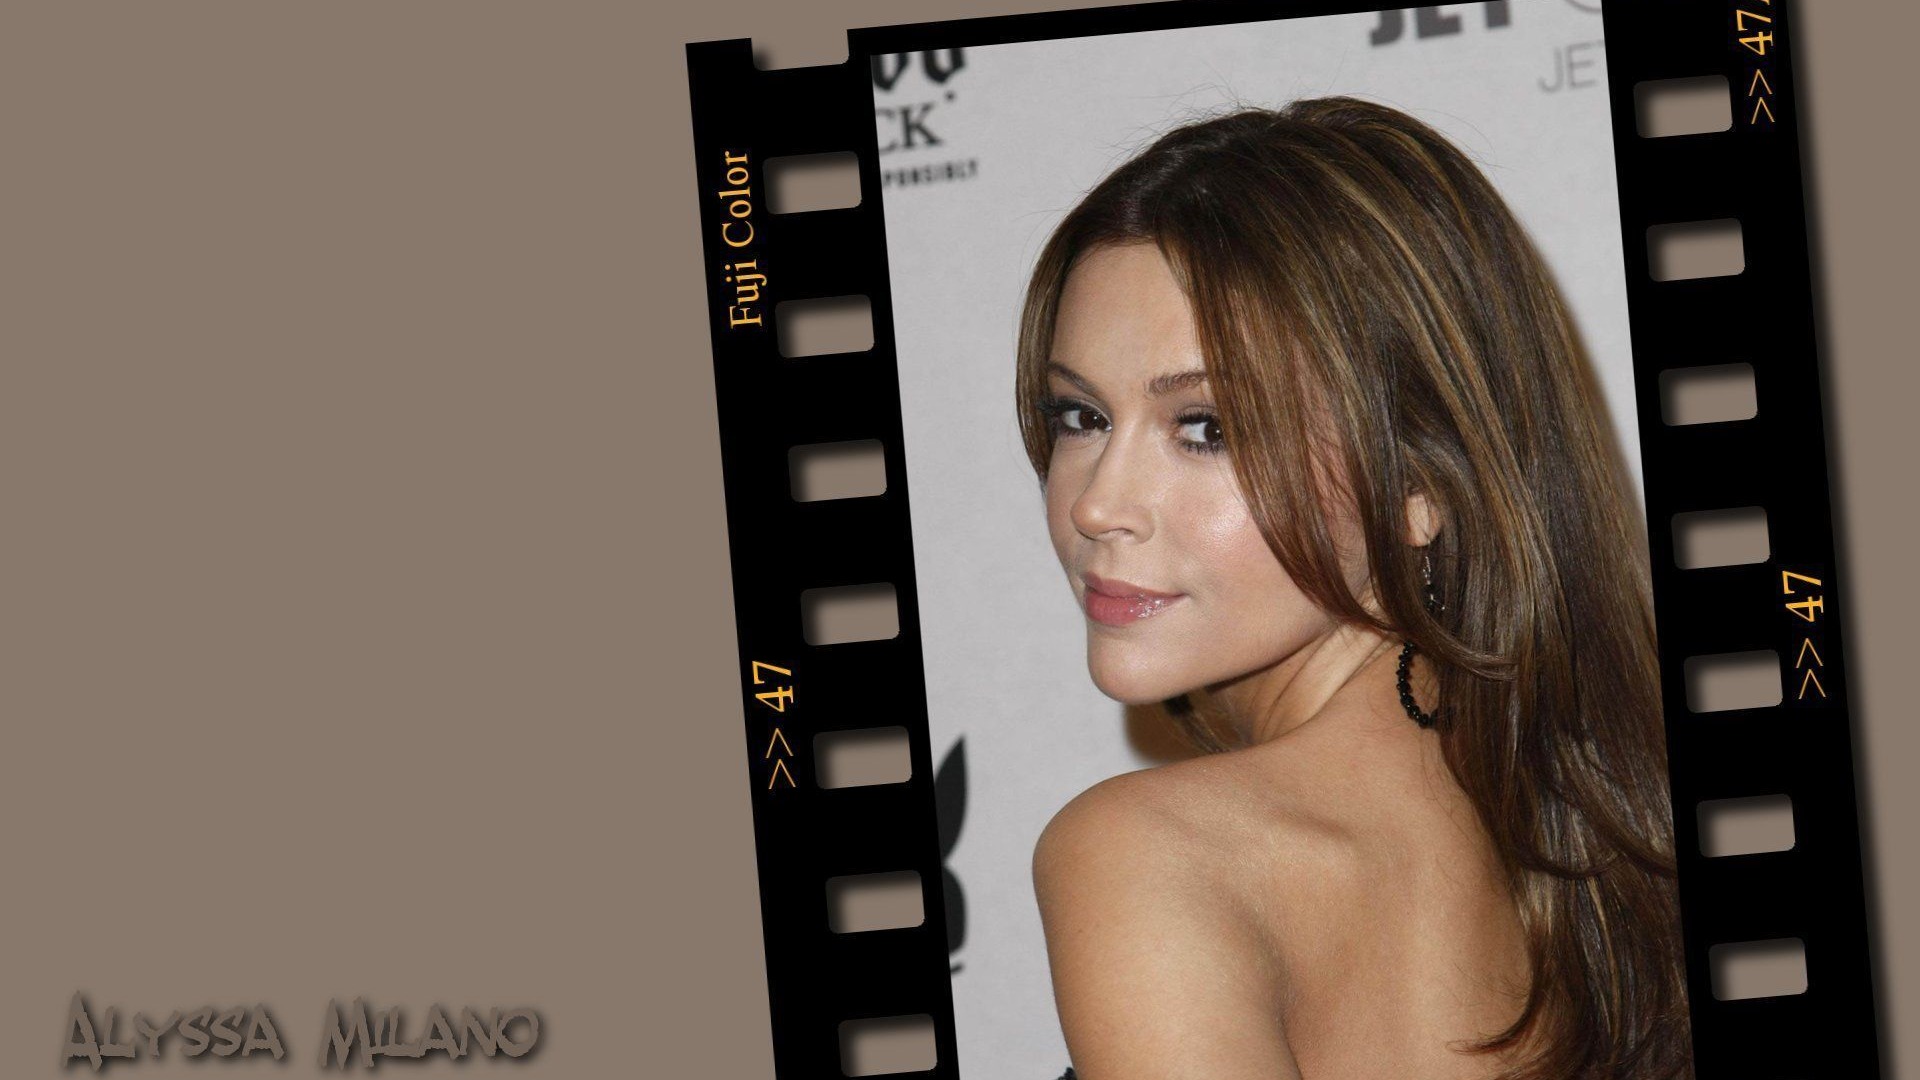 Alyssa Milano #043 - 1920x1080 Wallpapers Pictures Photos Images